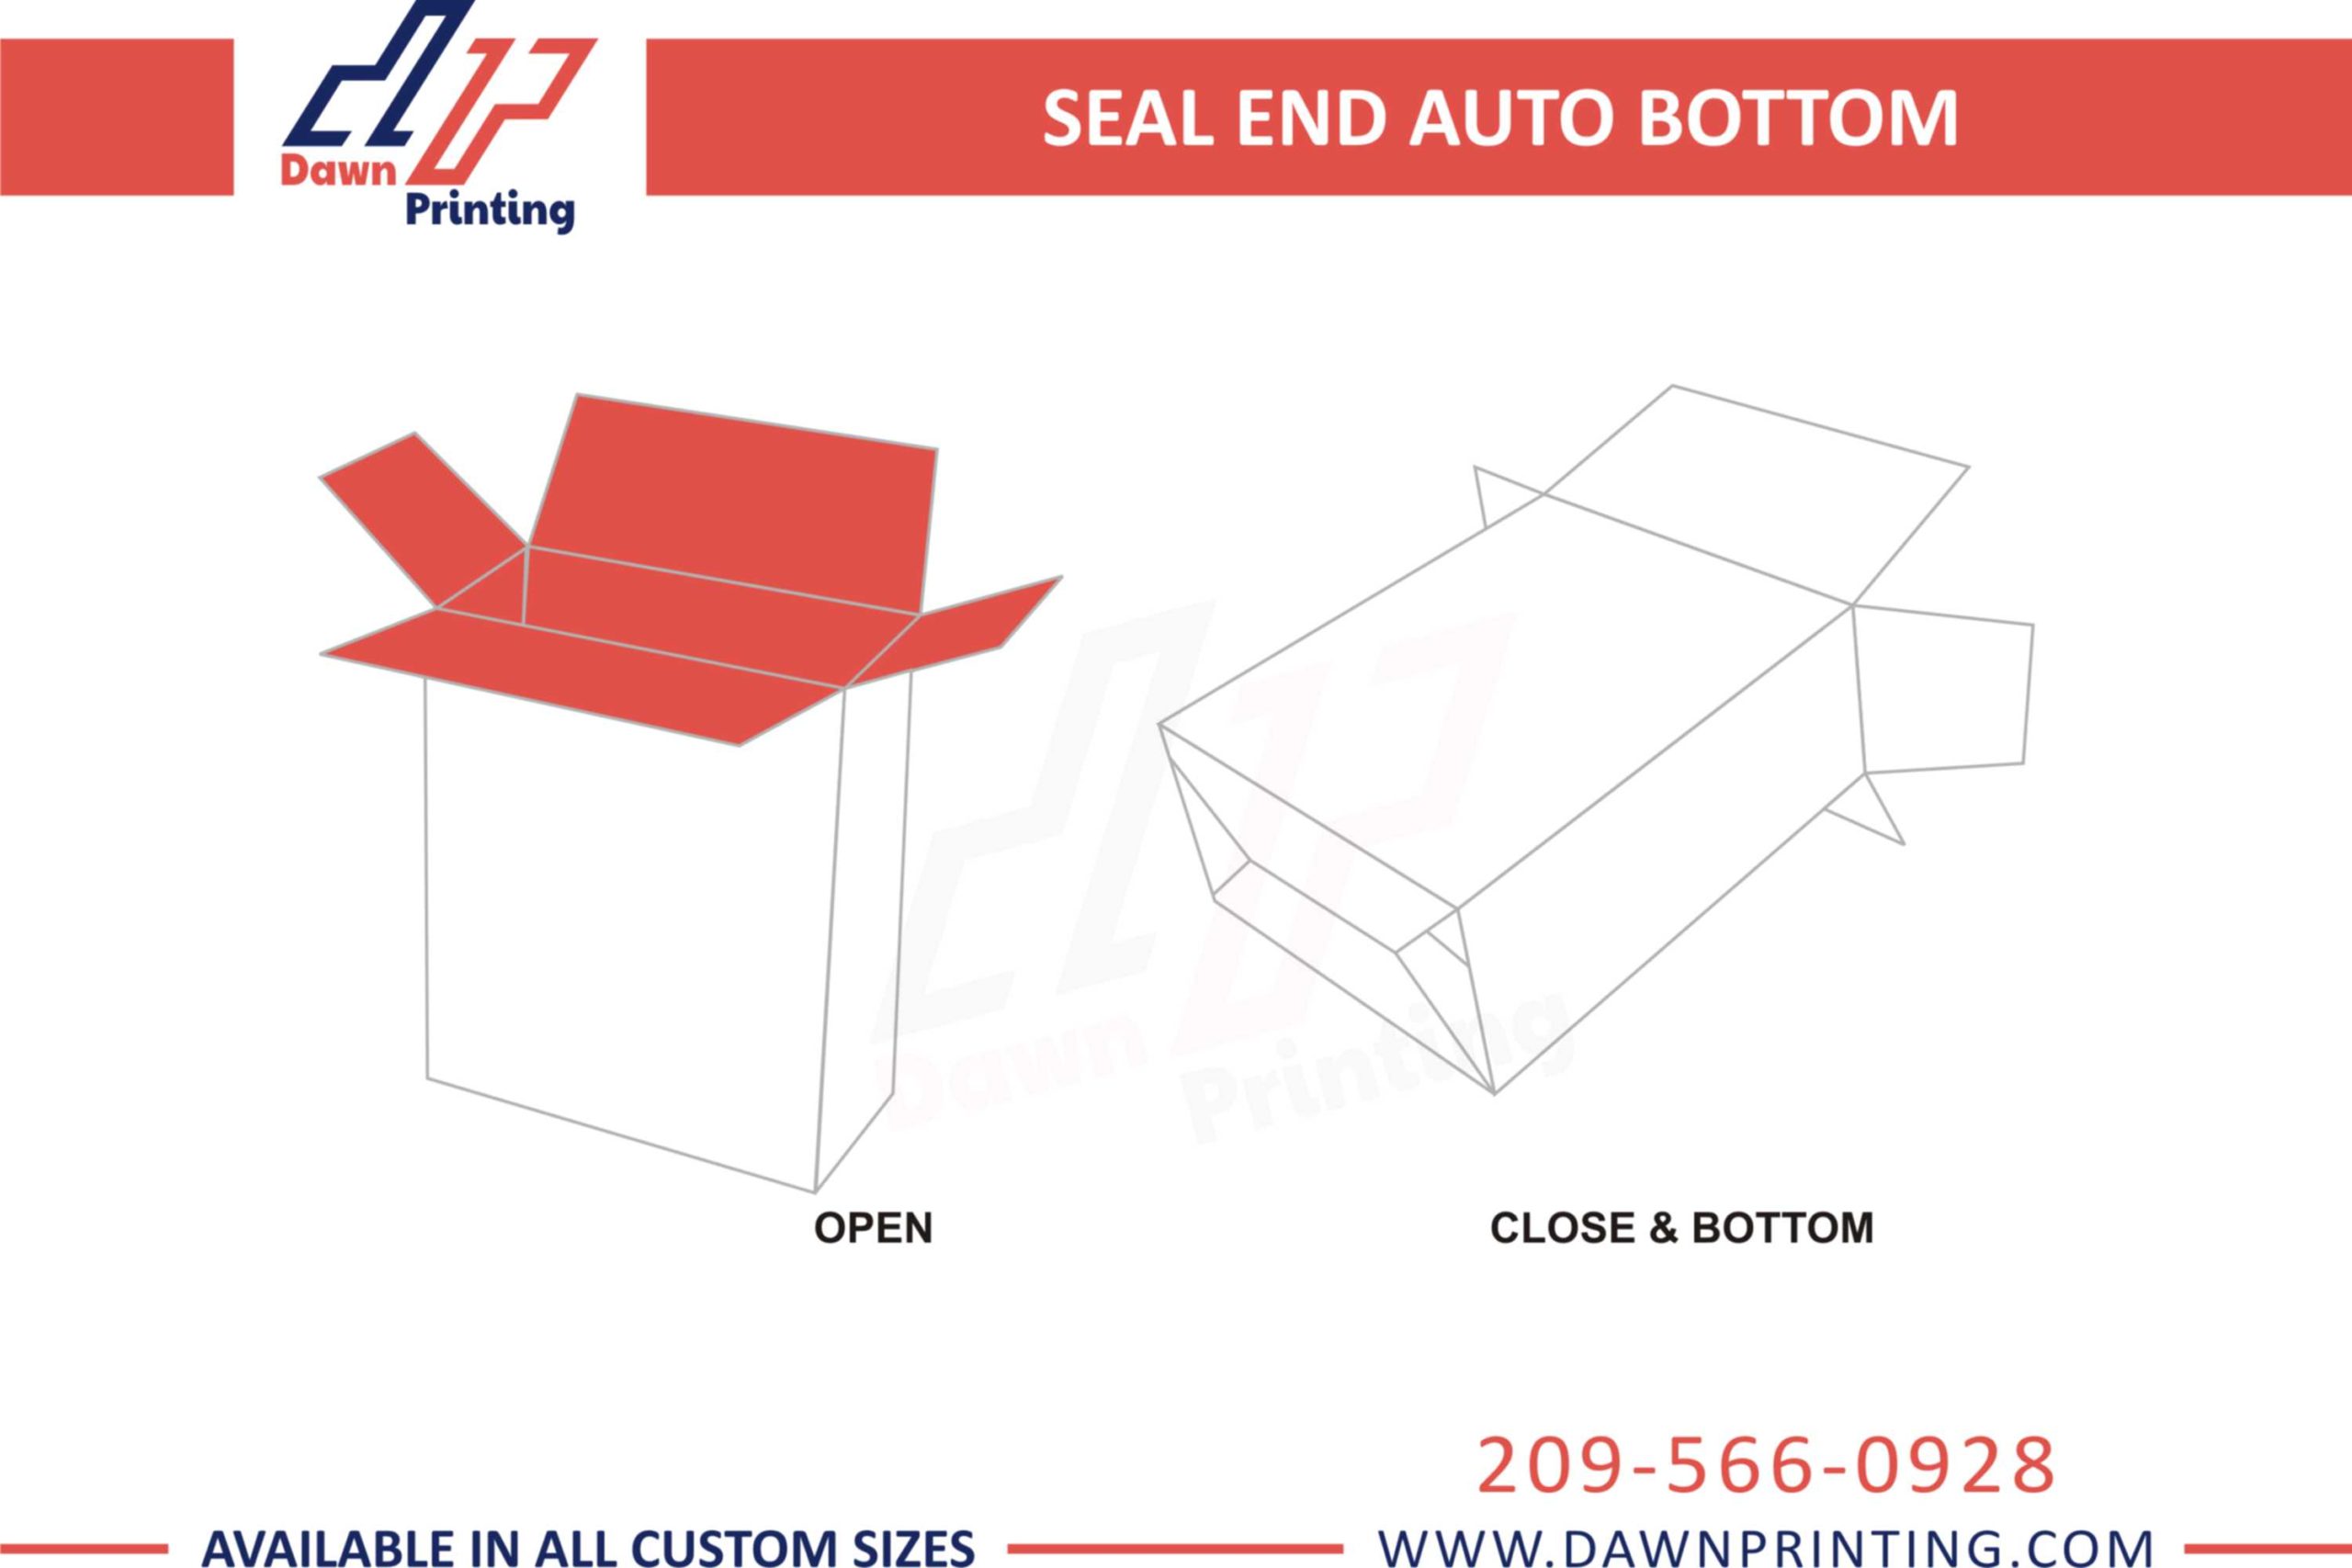 Custom SEAL END AUTO BOTTOM Packaging Boxes - Dawn Printing